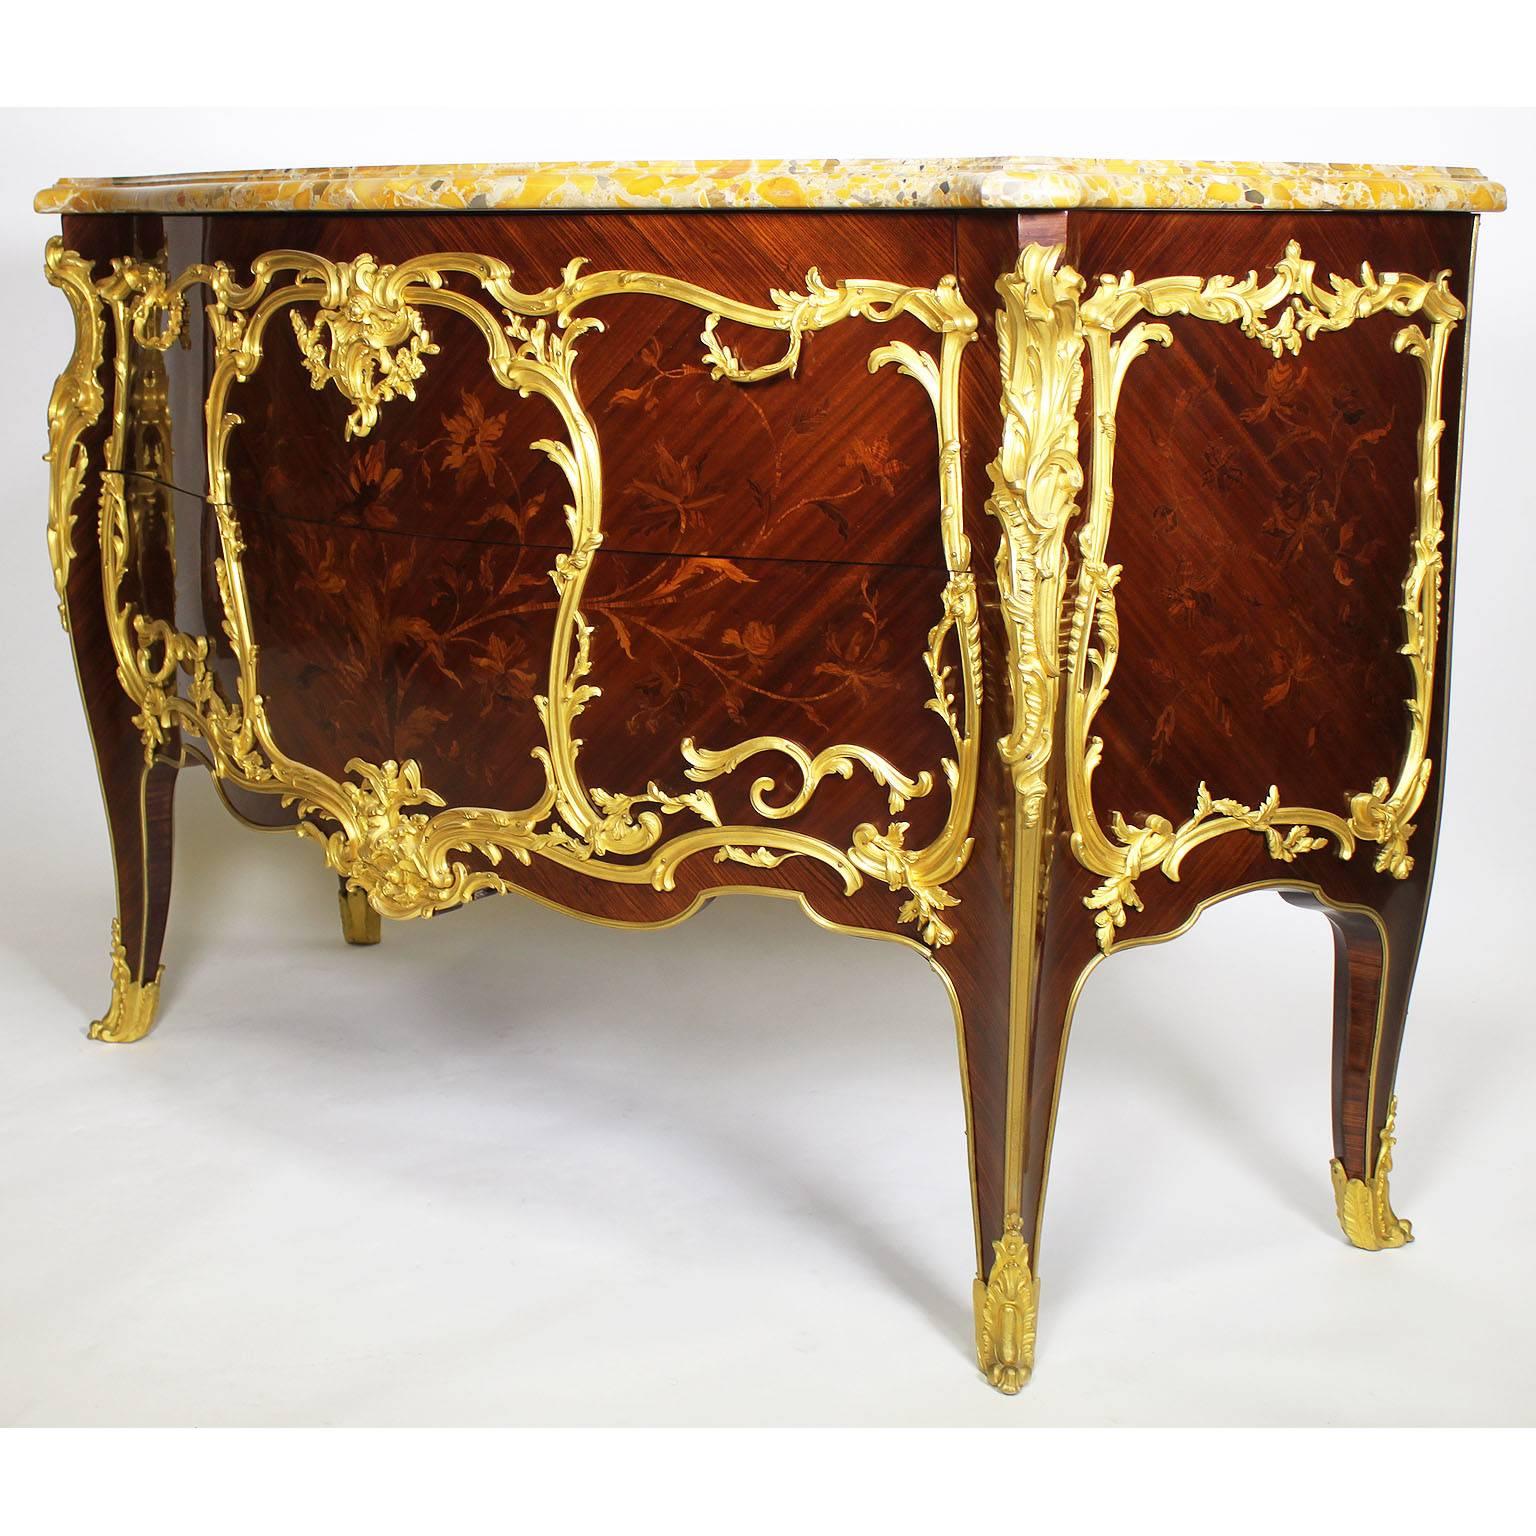 Carved Fine Pair of 19th Century Louis XV Style Gilt Bronze-Mounted Commodes For Sale